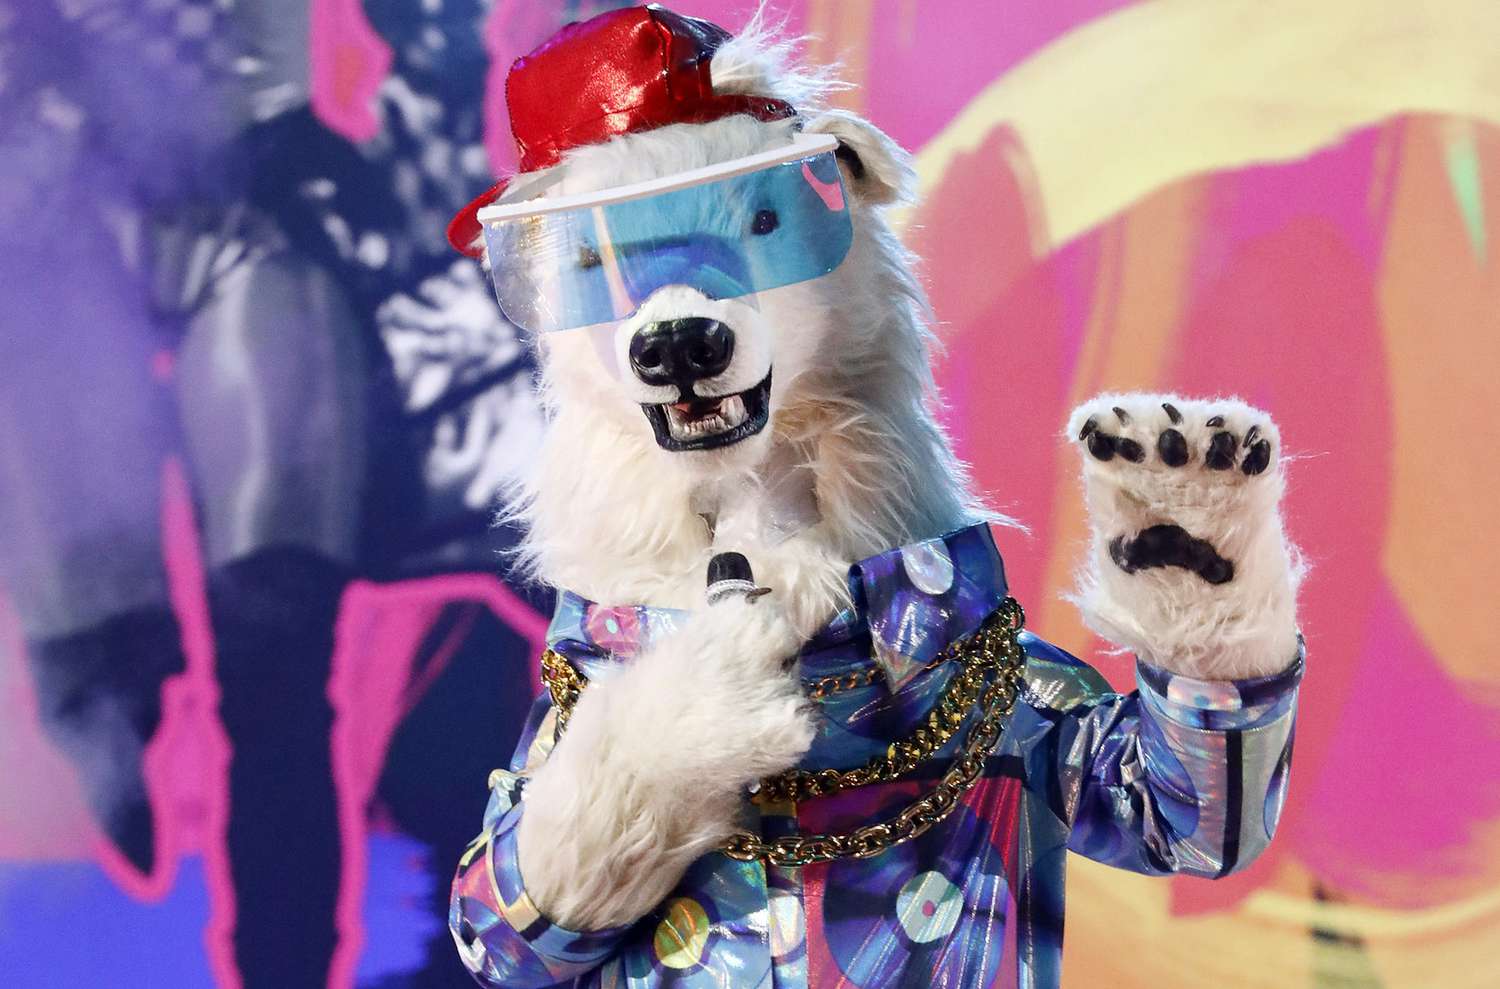 Polar Bear on how ‘Masked Singer’ was way different than his epic Grammys hip-hop performance